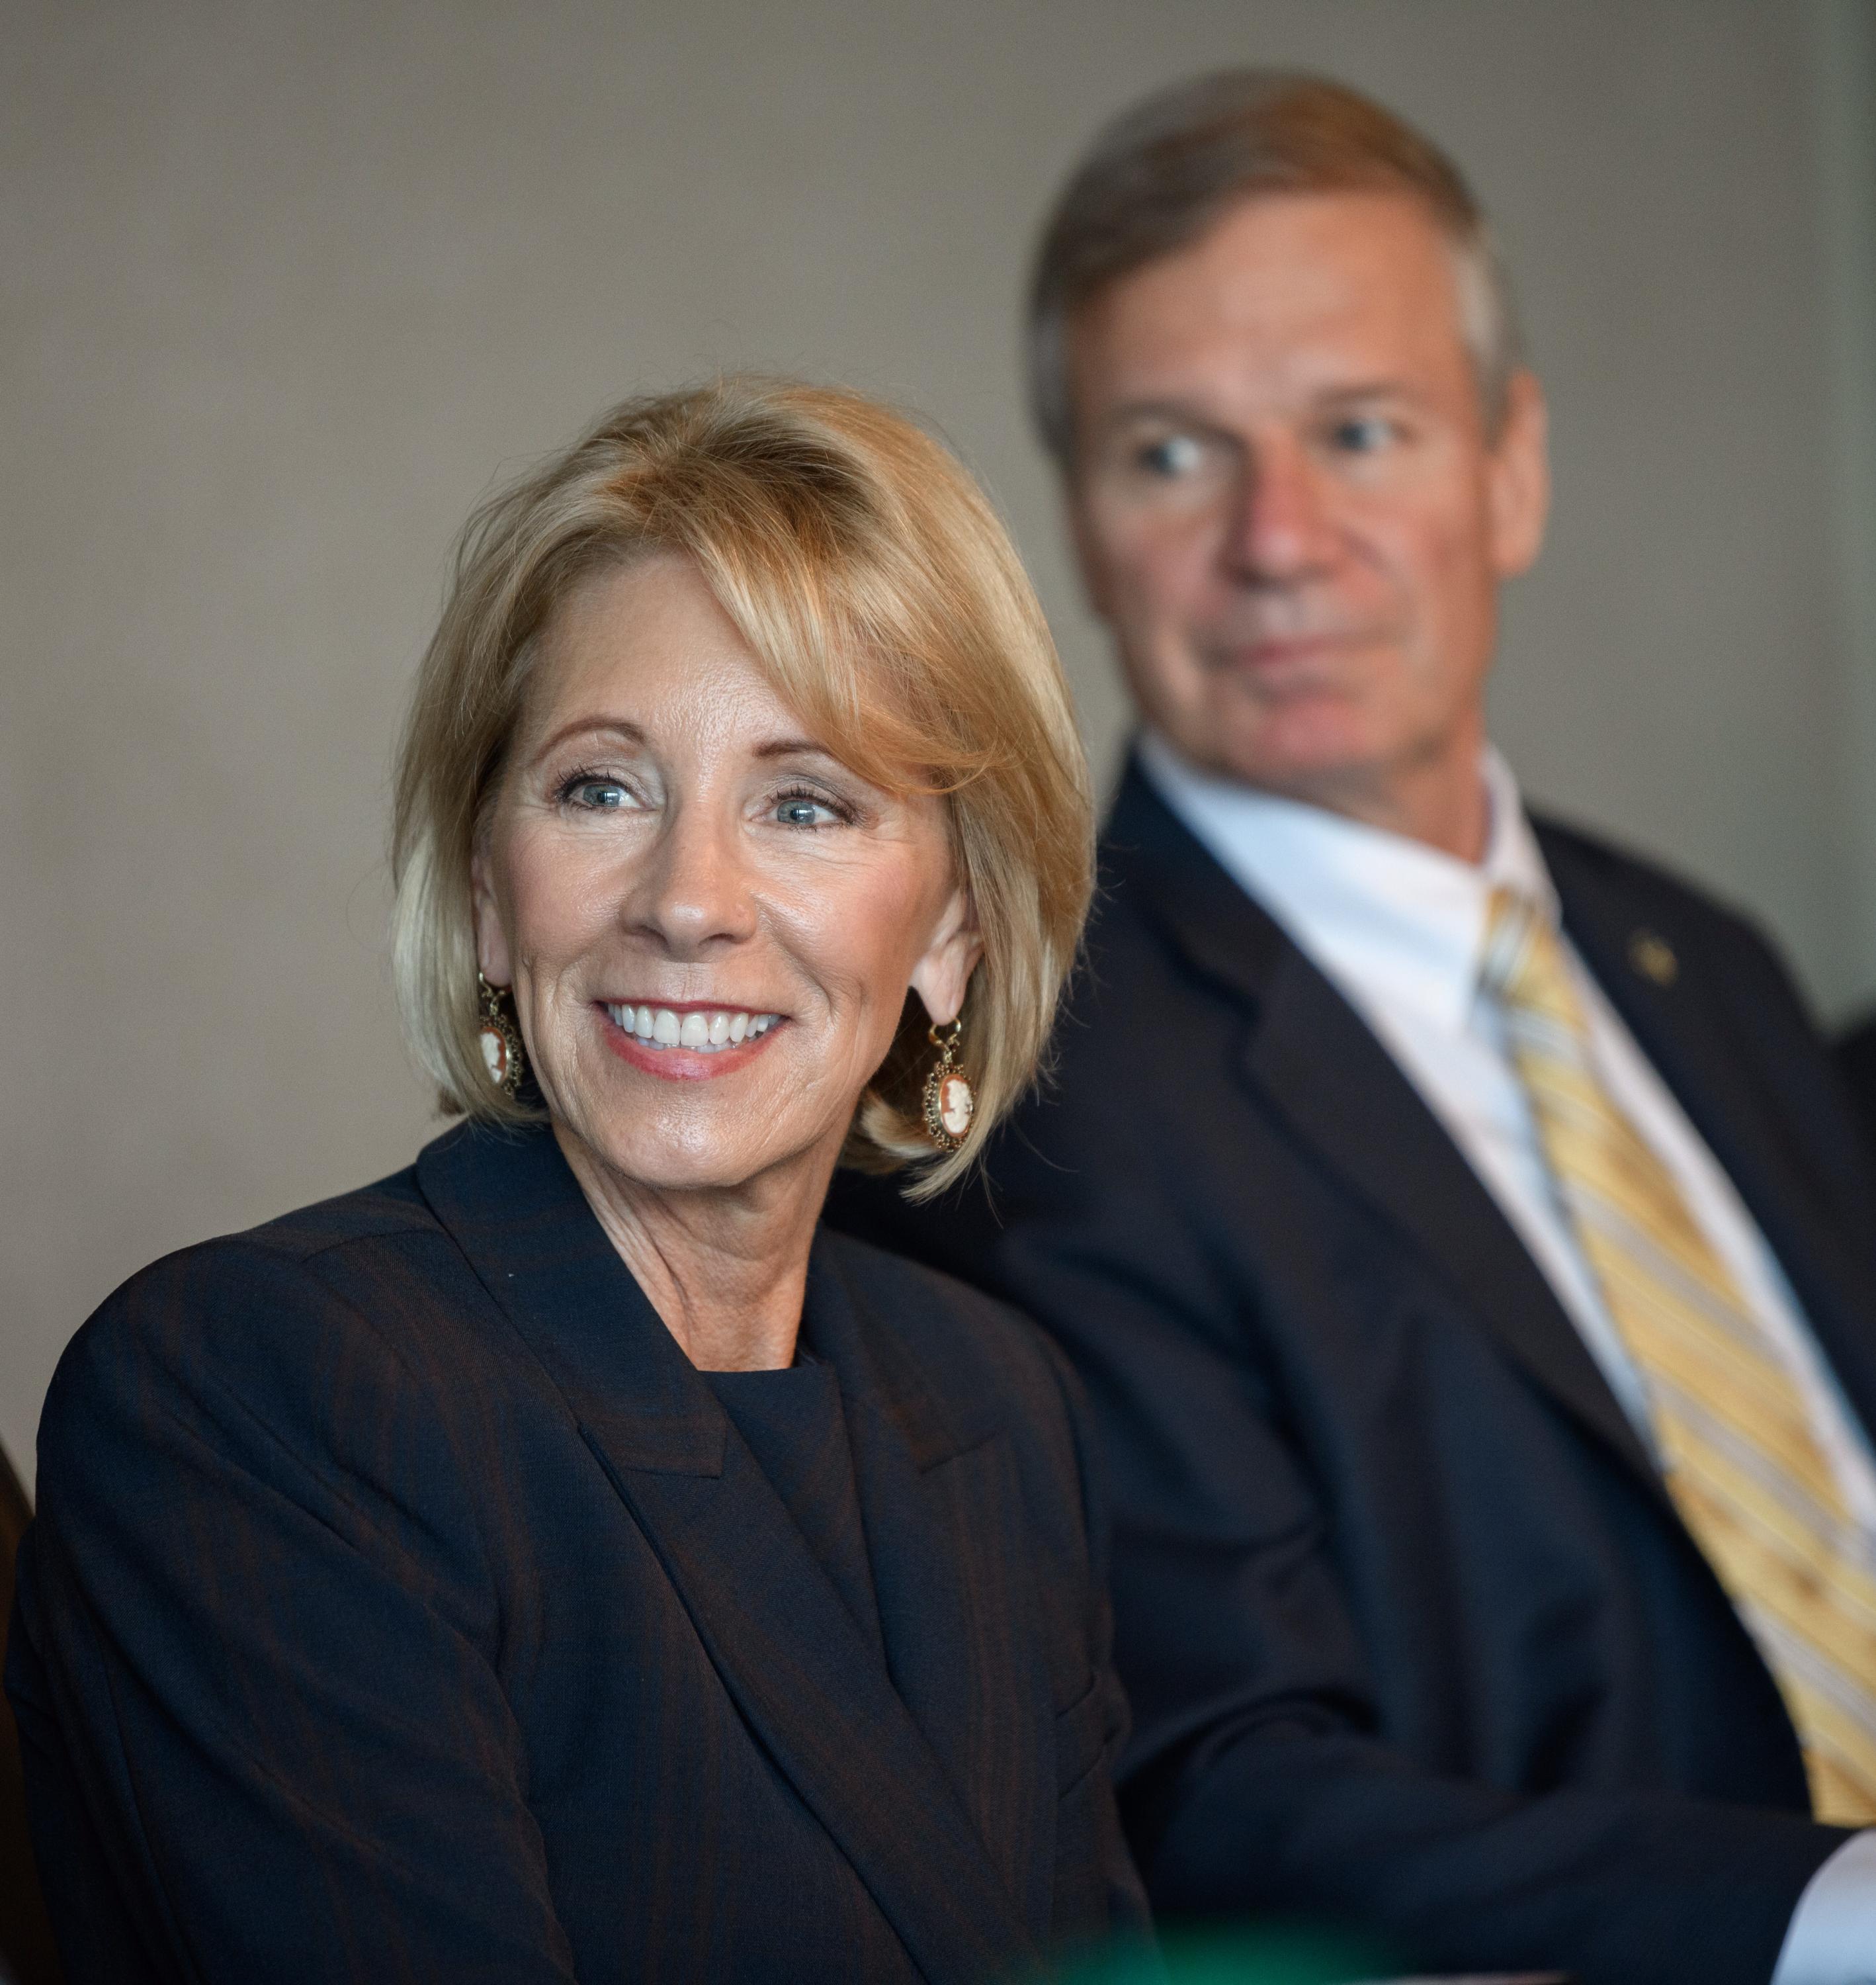 U.S. Secretary of Education Betsy DeVos visited Georgia Tech Wednesday and listened to a presentation with President G.P. "Bud" Peterson. 

Photo by Rob Felt